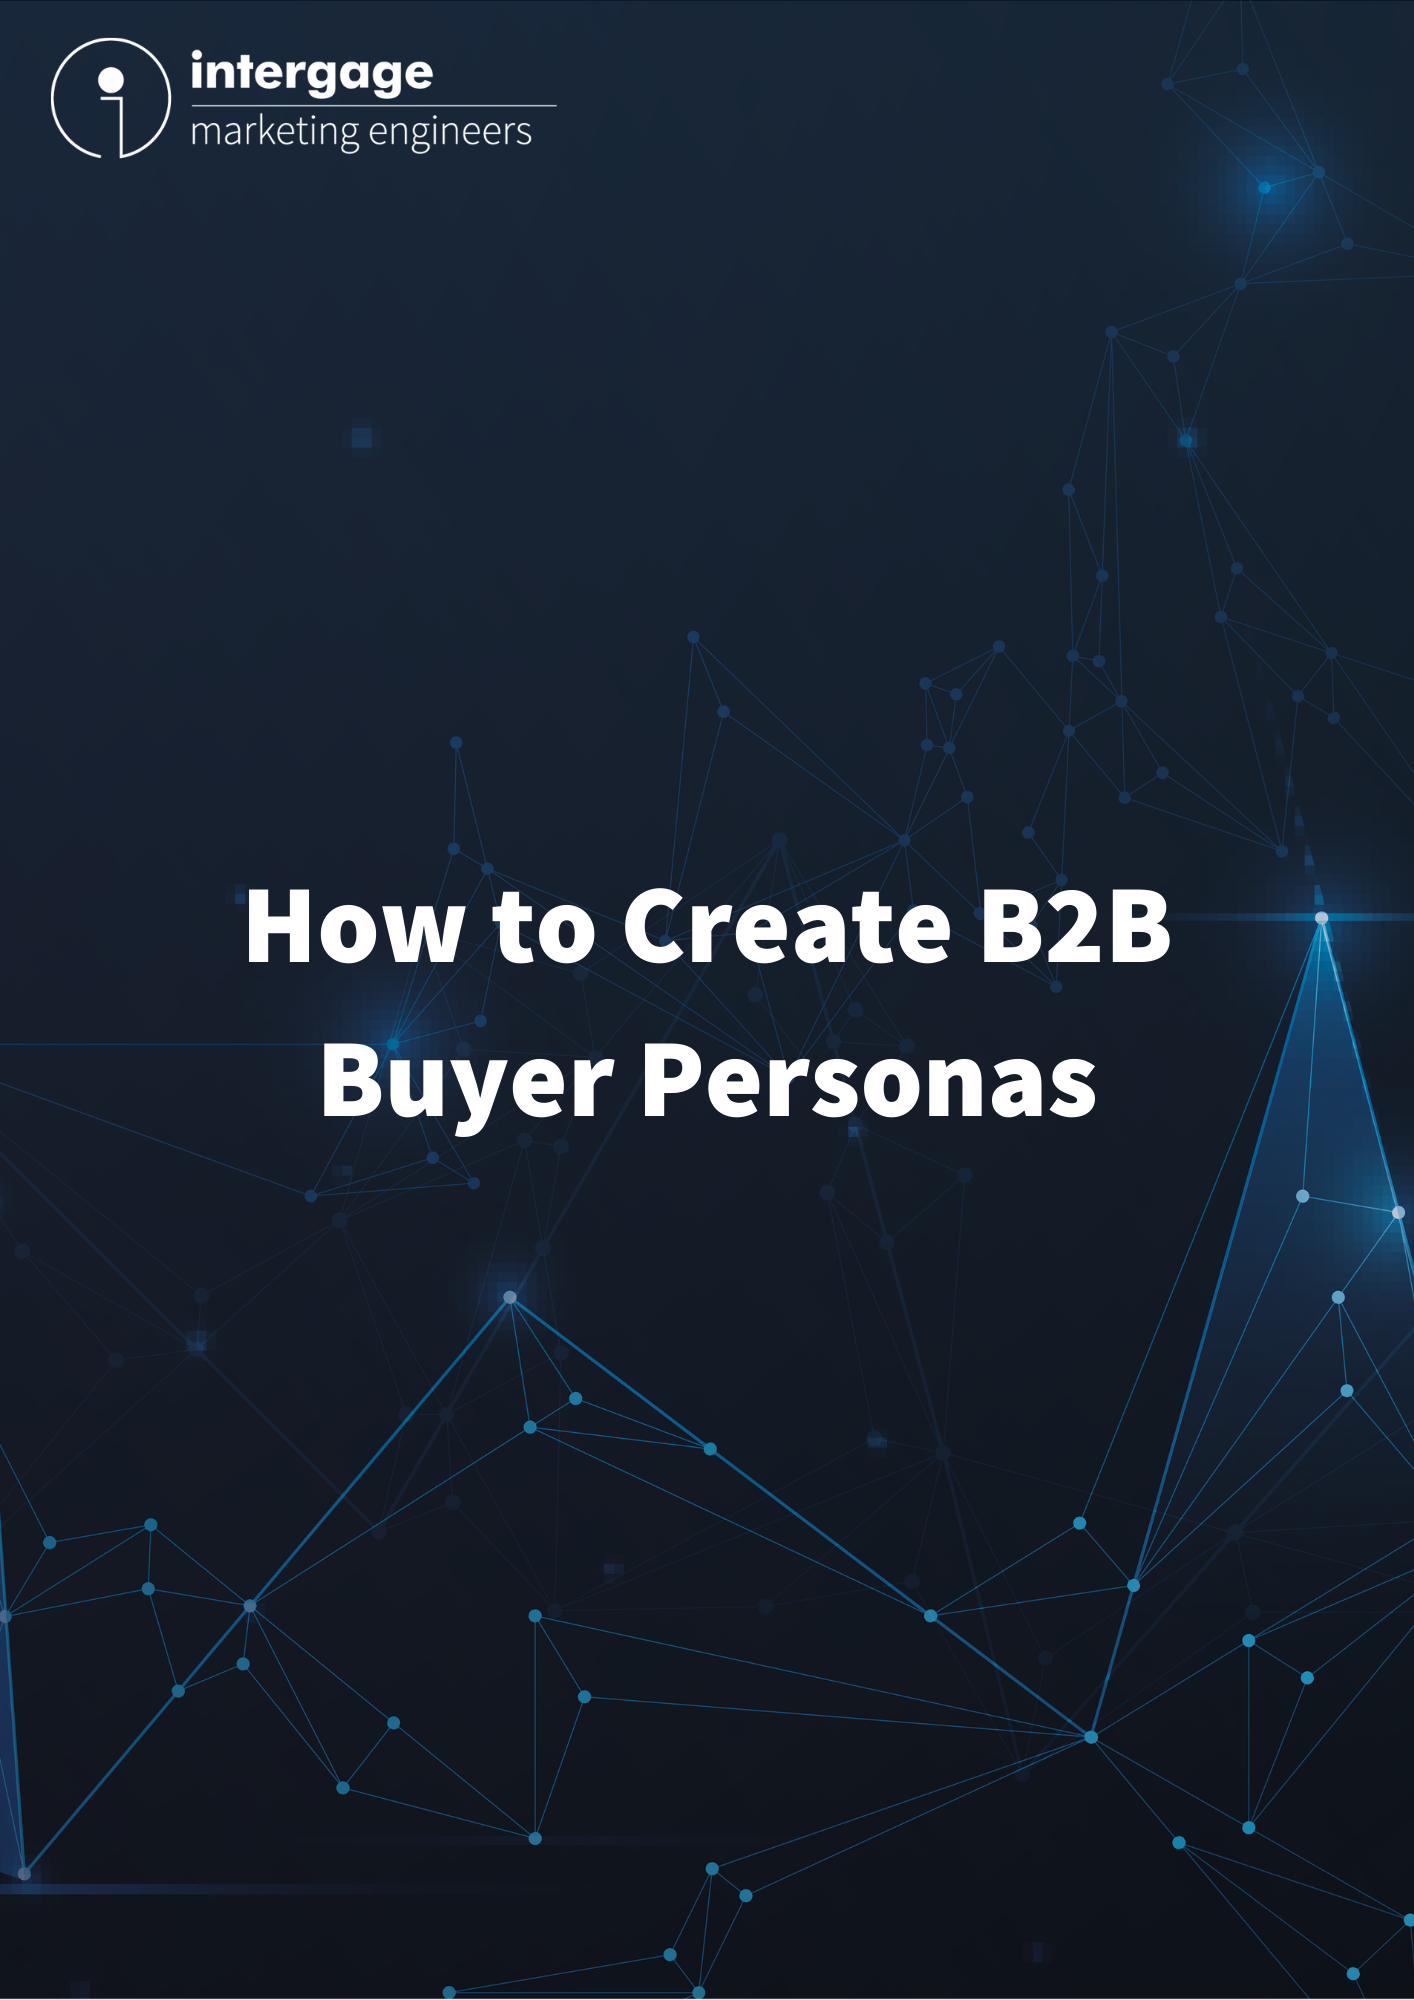 How to Create Buyer Personas